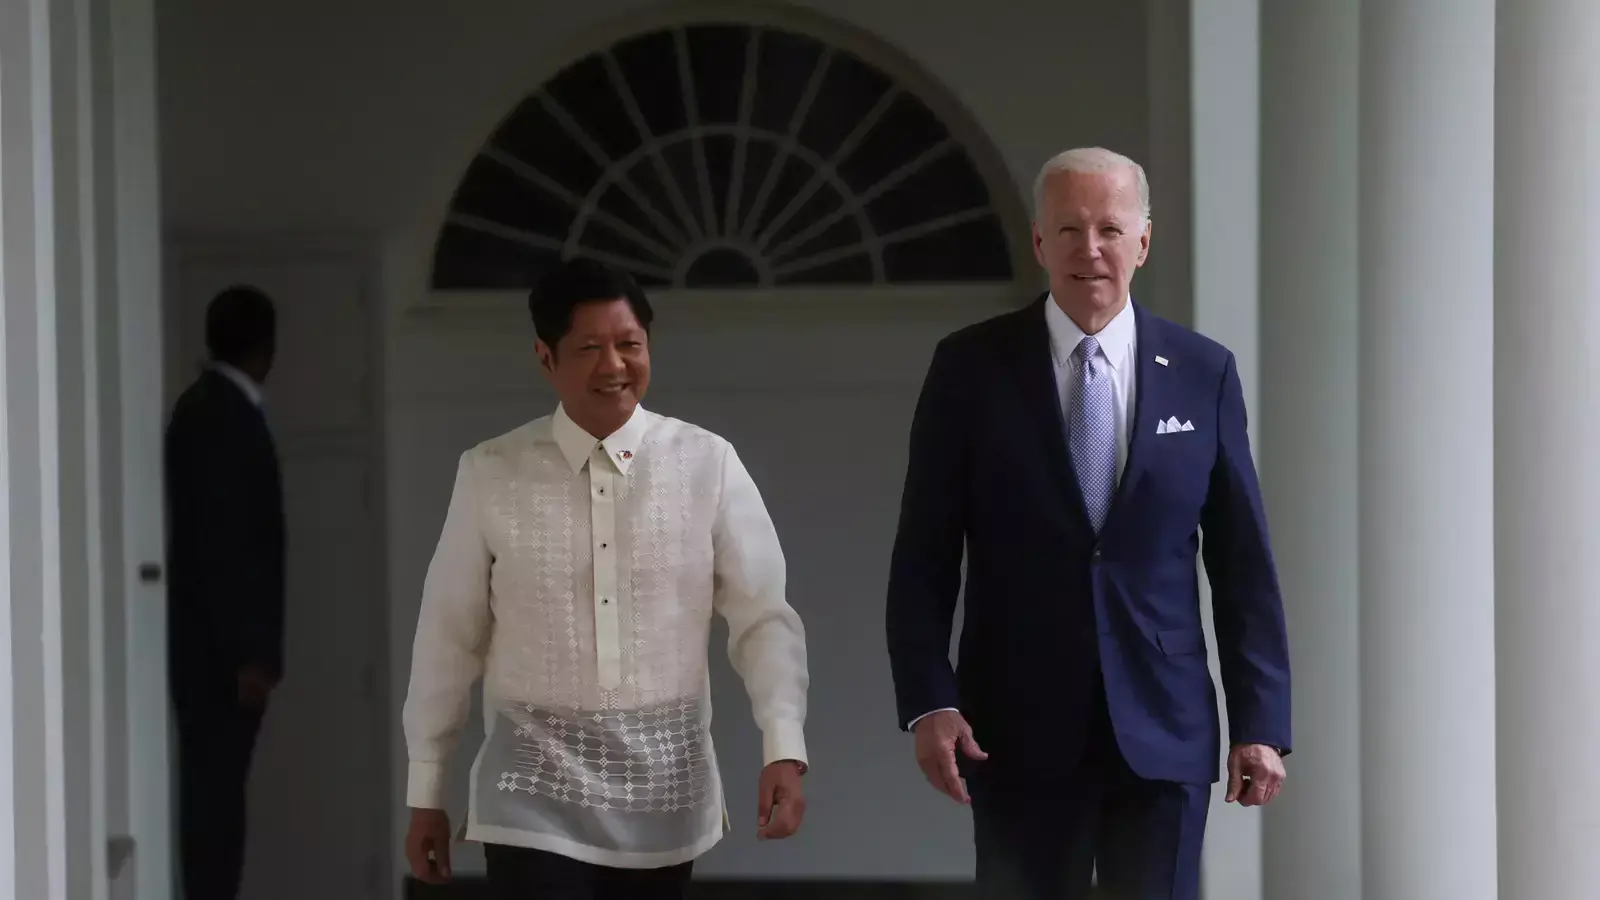 Philippine President Ferdinand Marcos Jr. and U.S. President Joe Biden walk up the West Wing colonnade on their way to the Oval Office at the White House in Washington on May 1, 2023.